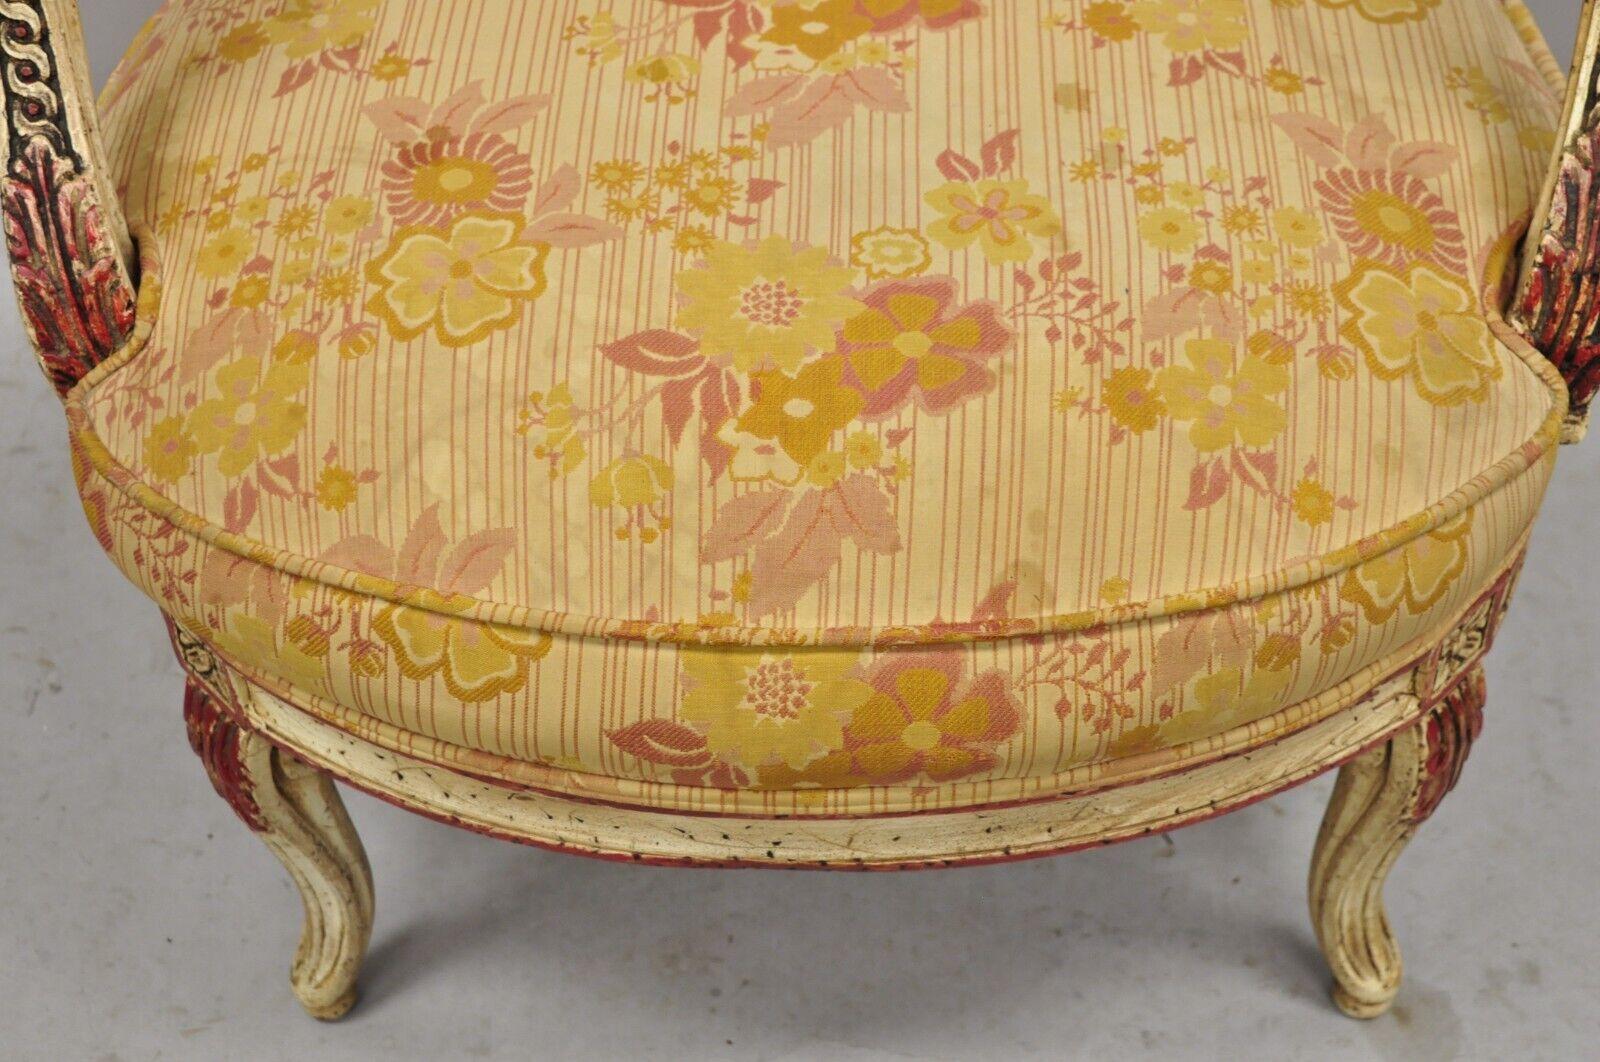 Vintage French Louis XV Style Cream and Red Painted Low Boudoir Fauteuil Chair For Sale 6